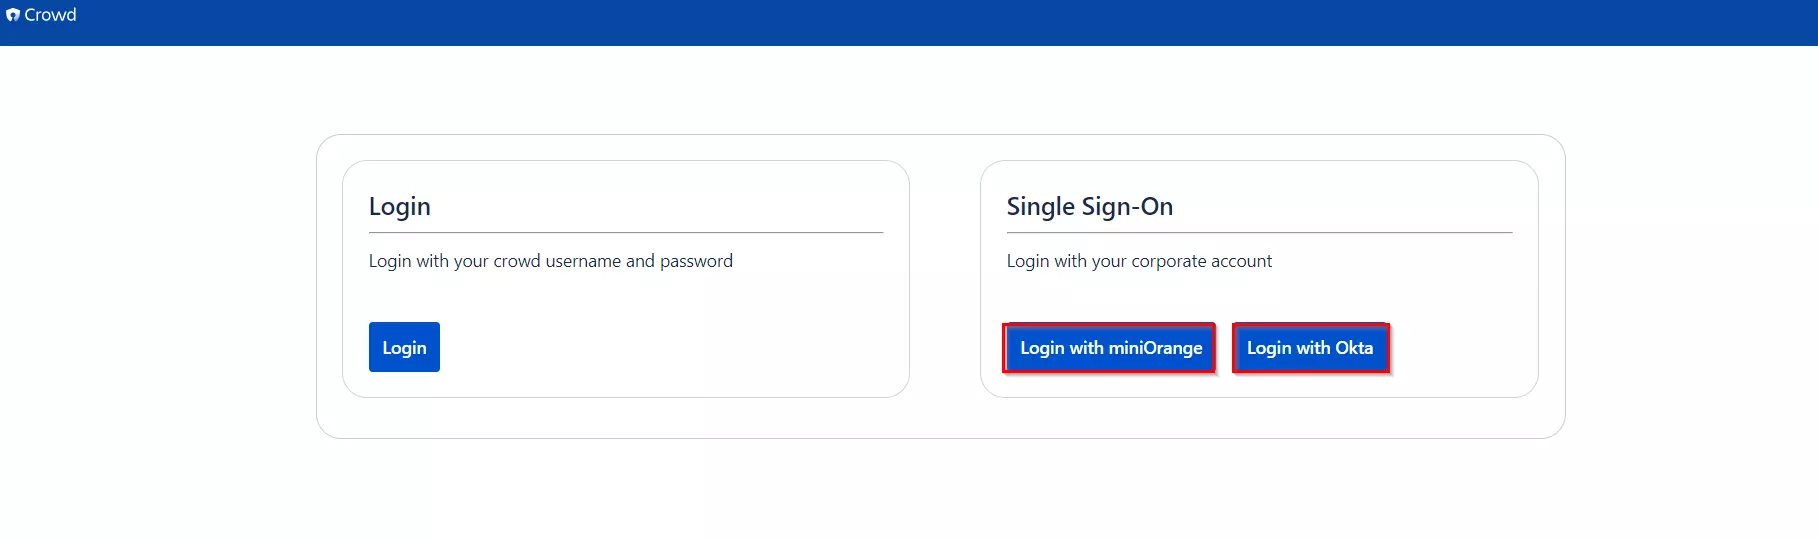 SAML Single Sign On (SSO) into Crowd, login buttons on login page for multiple IDP